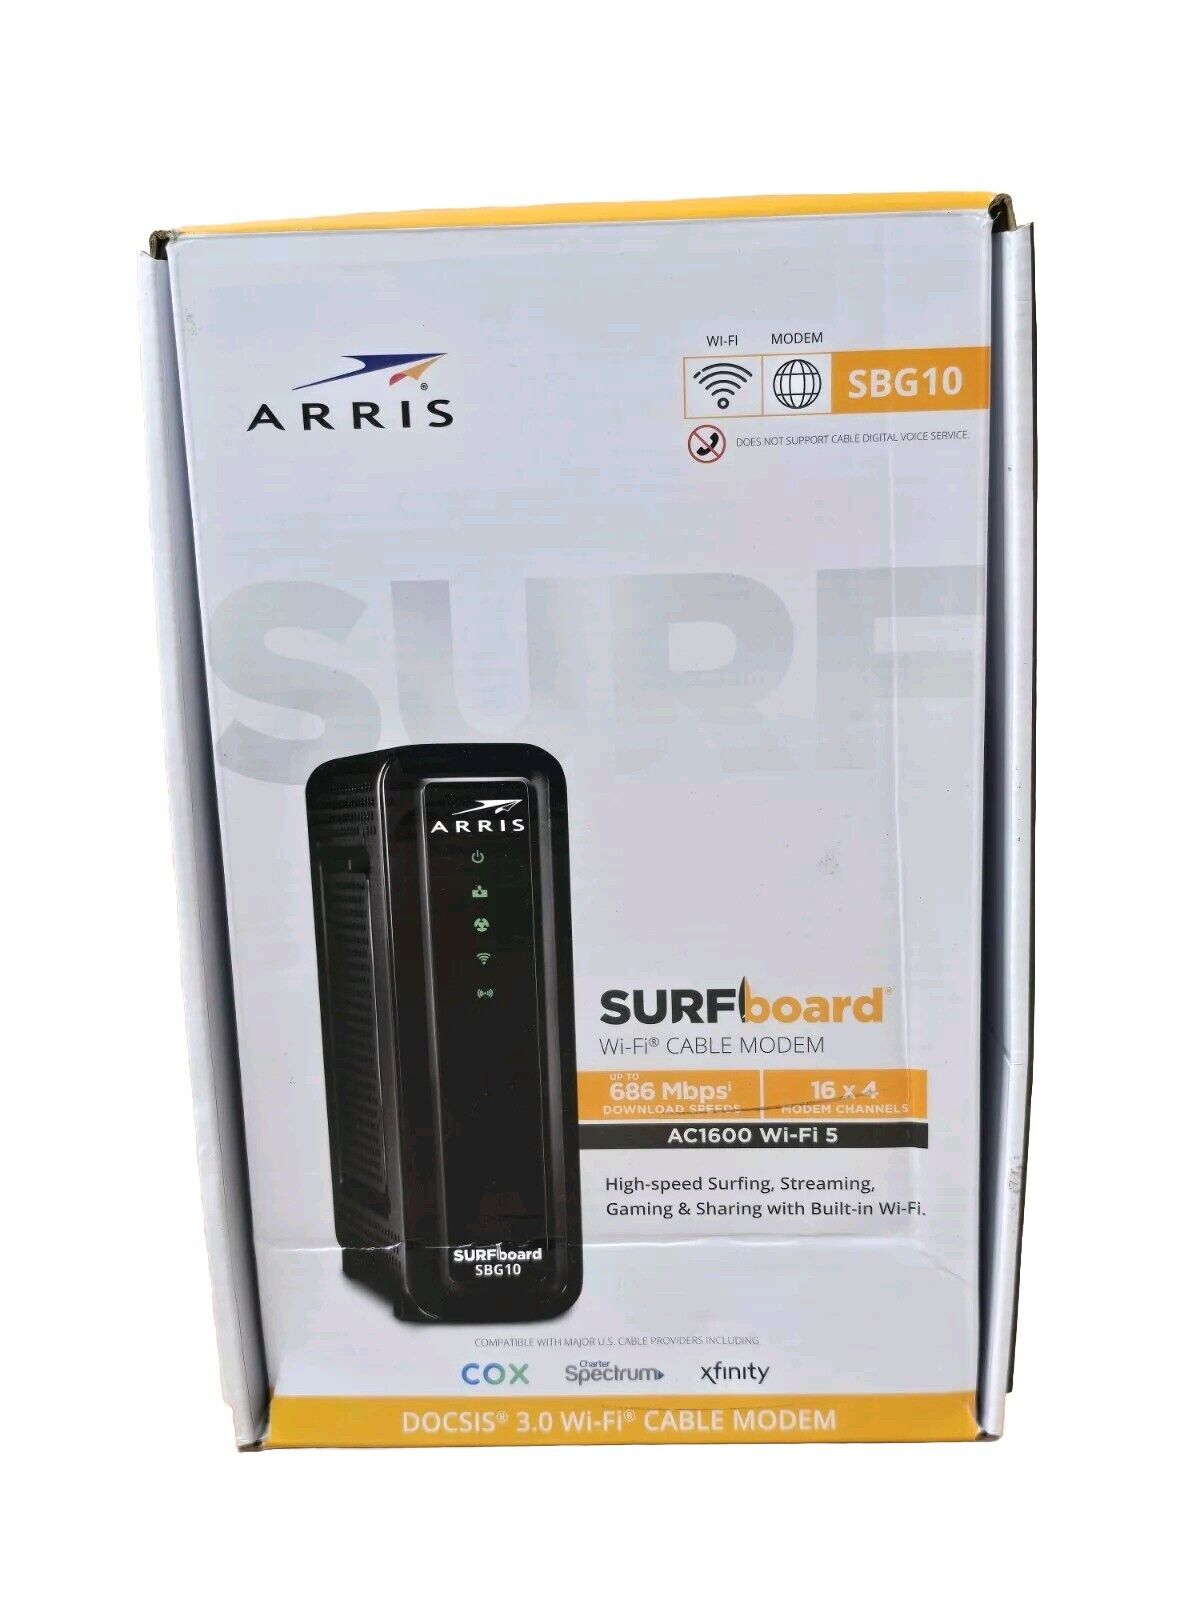 ARRIS Surfboard SBG10 AC1600 Wi-Fi Router Docsis 3.0 Cable Modem & WIFI Router